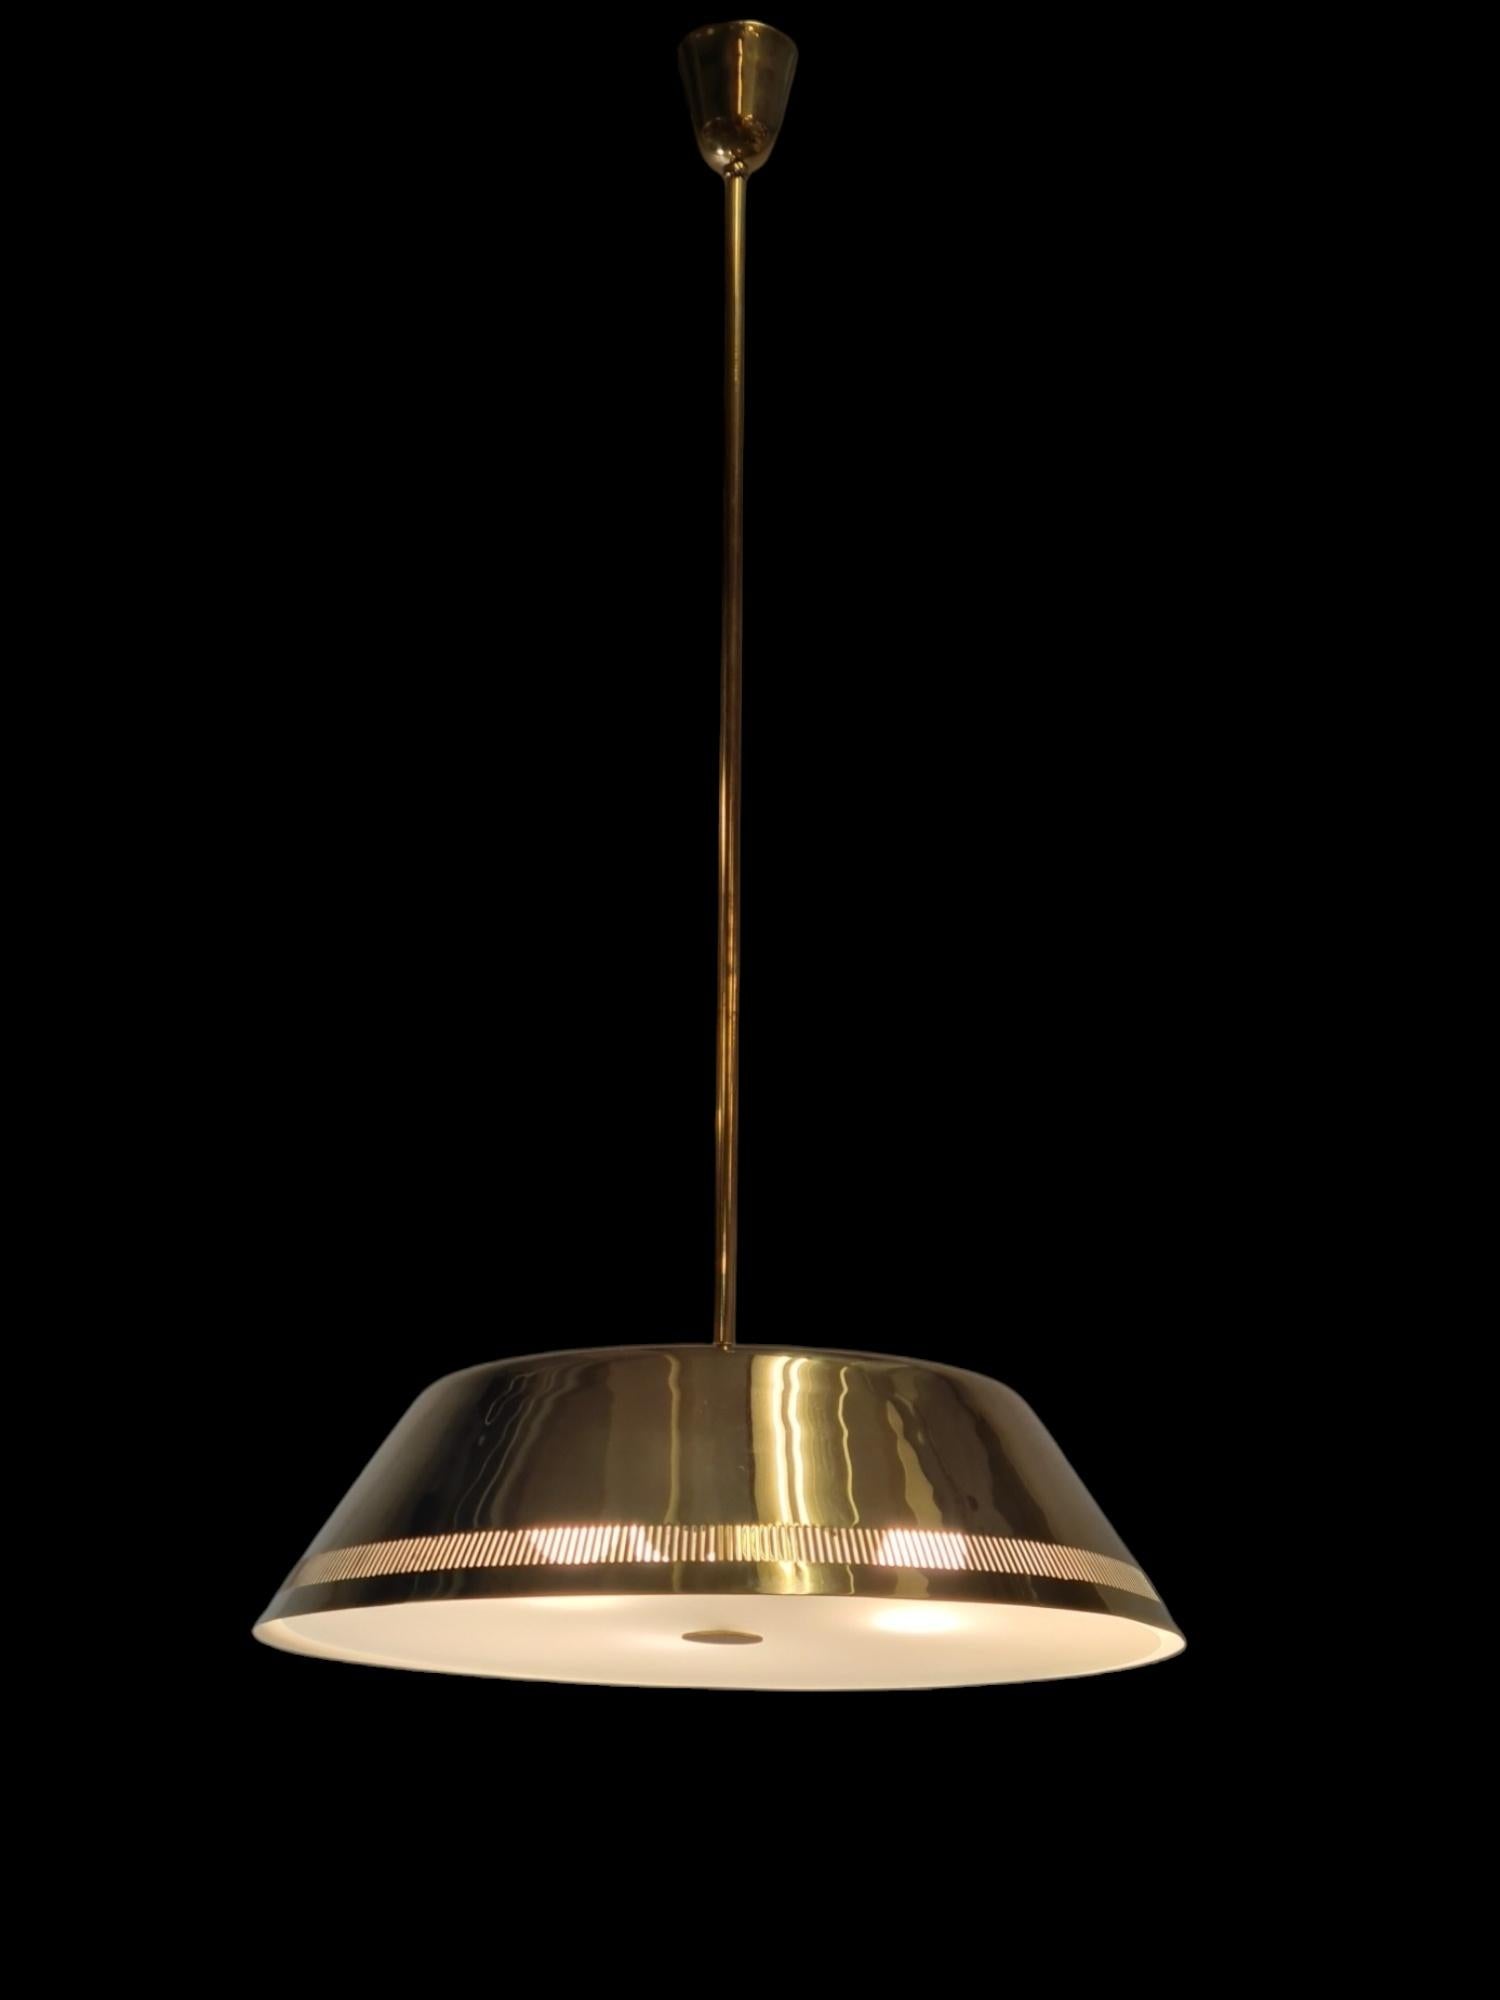 A Magnificent Paavo Tynell Ceiling Lamp Model 82500 for Idman, 1950s For Sale 7